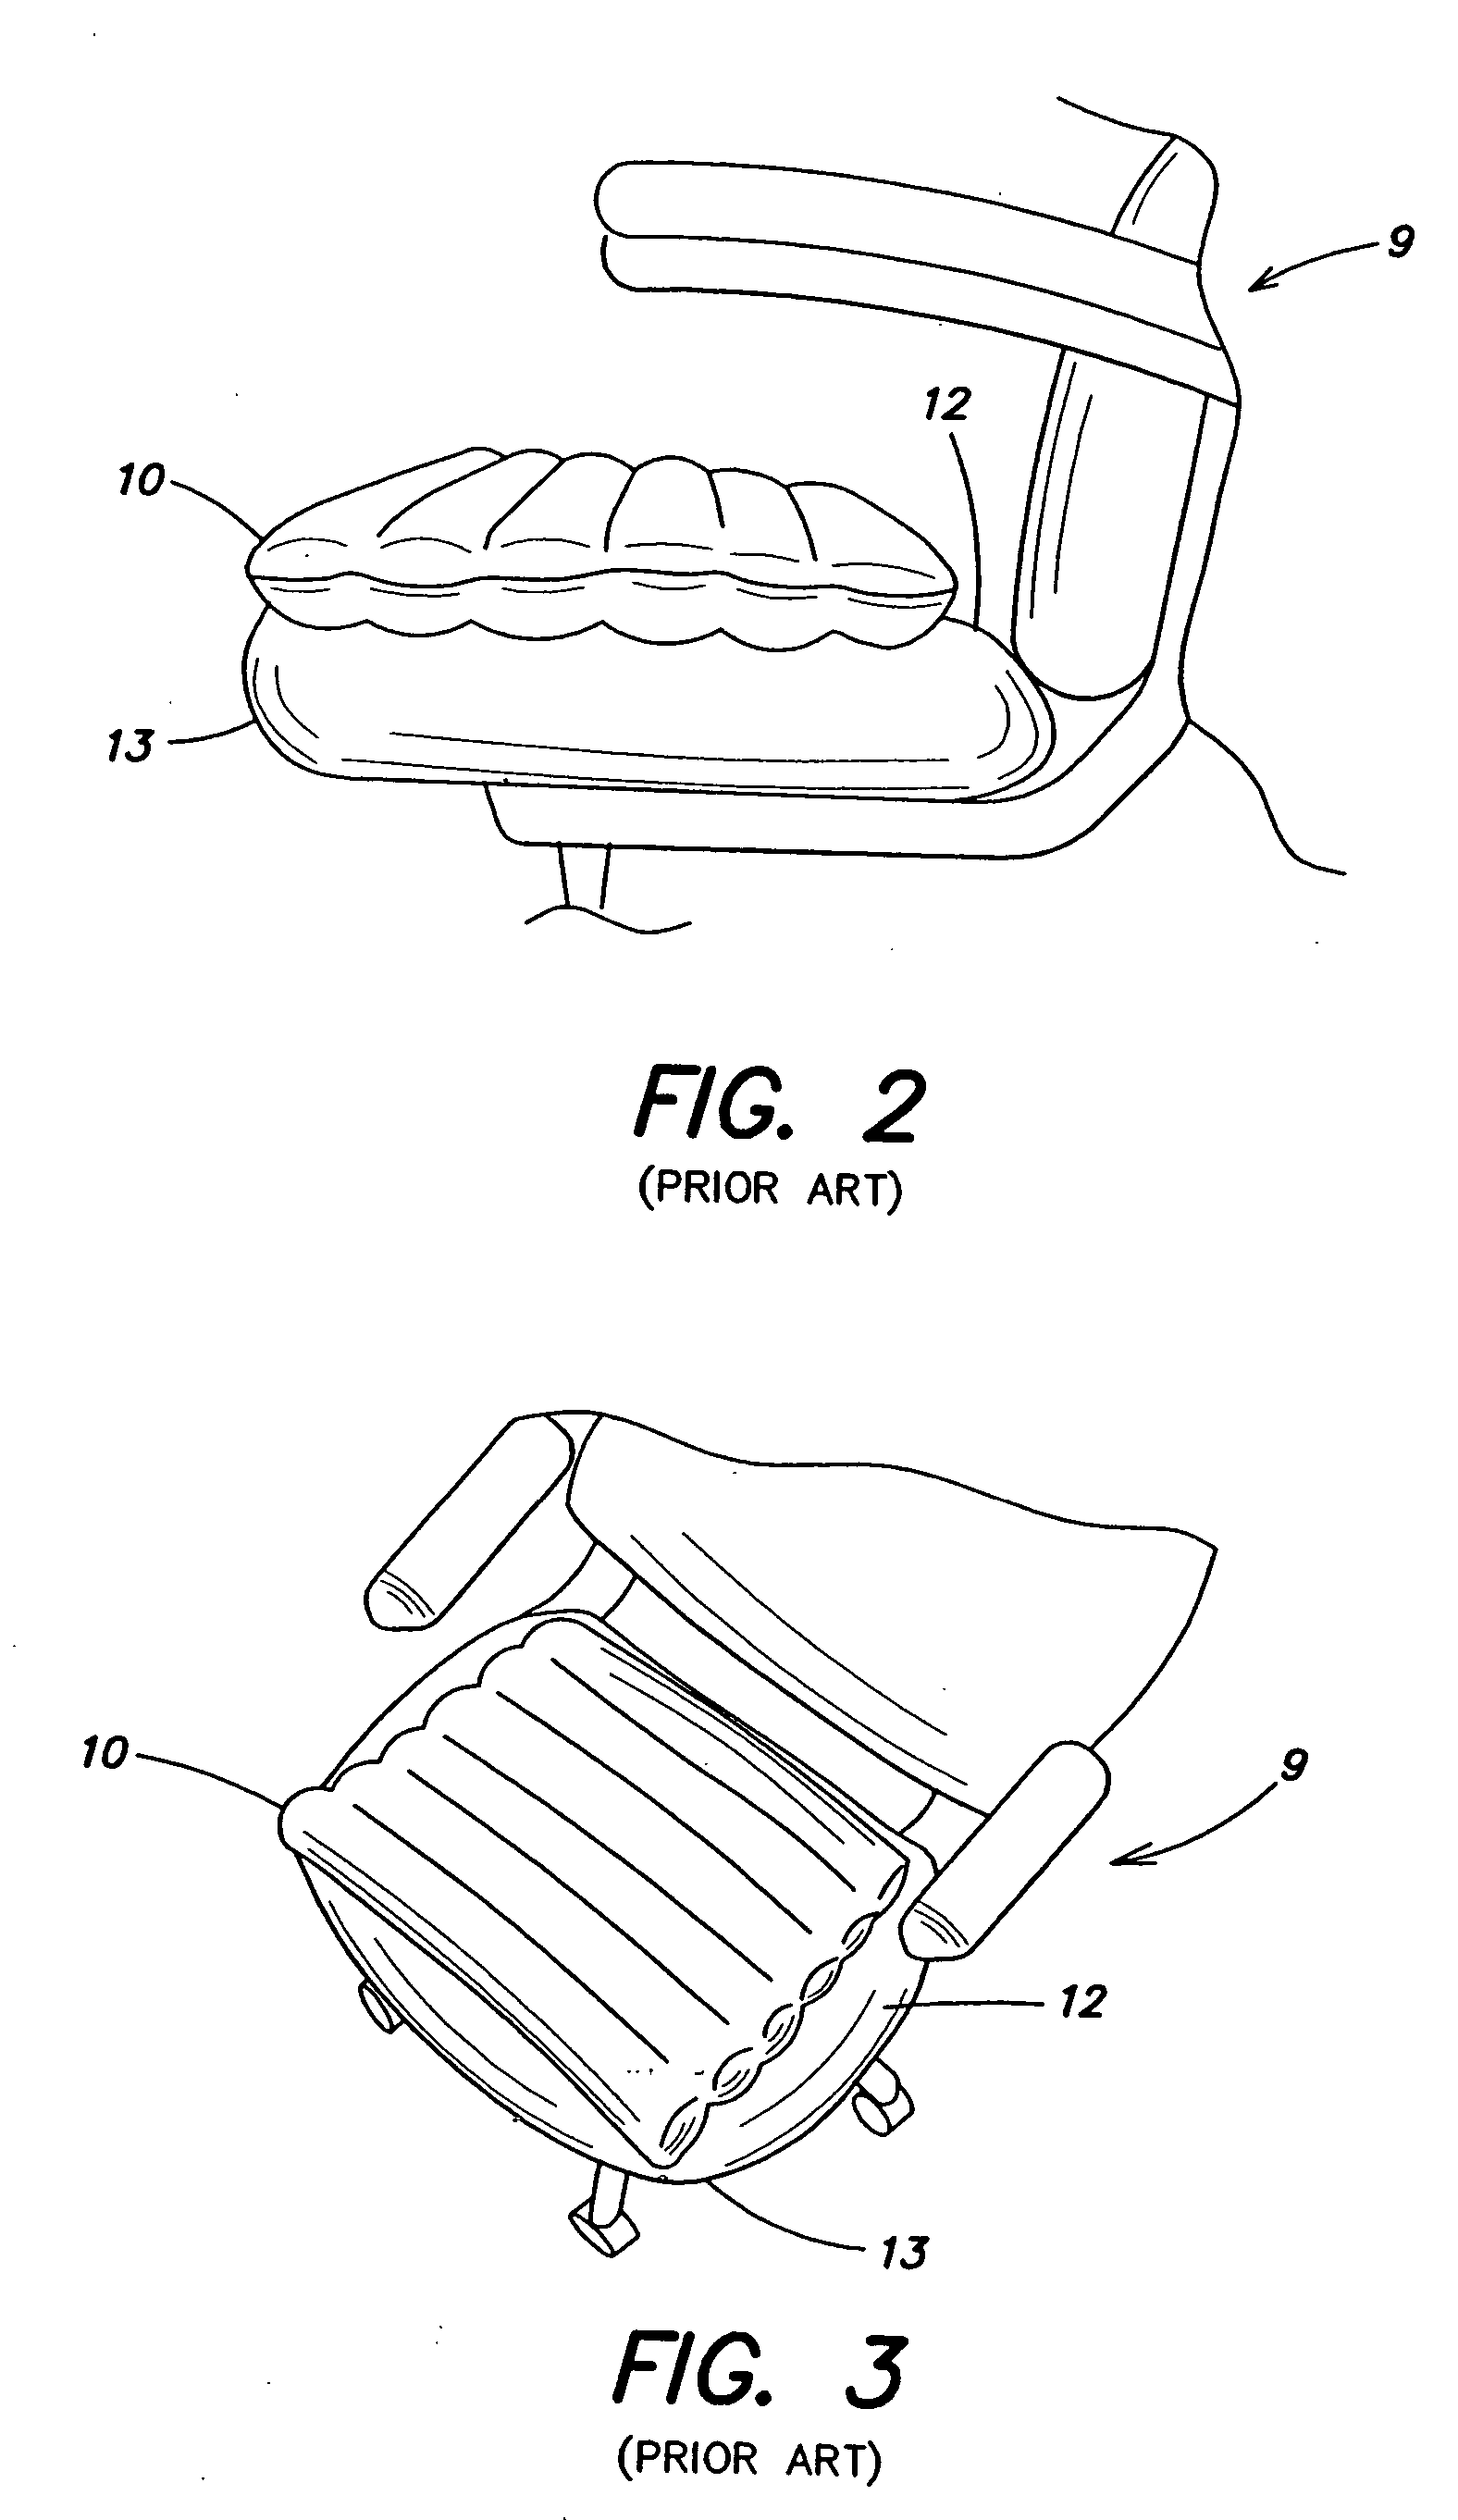 Body support comfort device